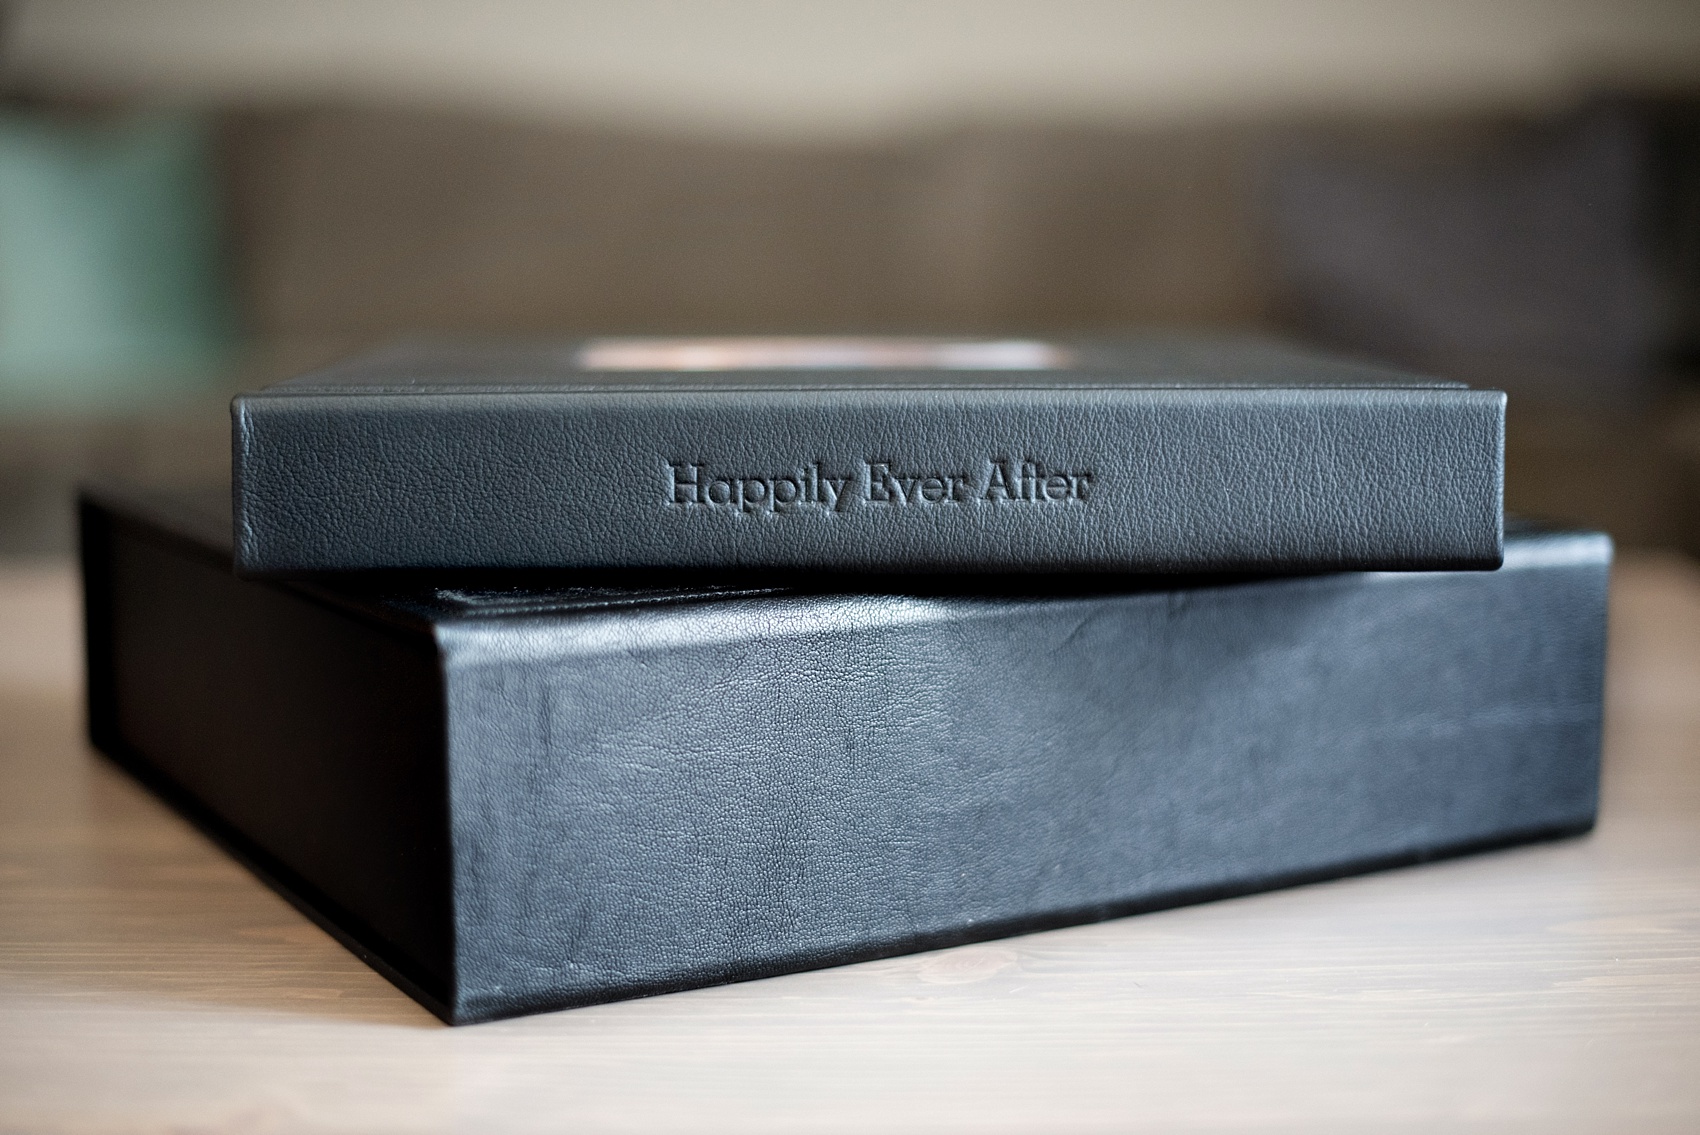 Mikkel Paige Photography photos of a black fine art leather wedding album with subtle Disney "Happily Ever After" theme.